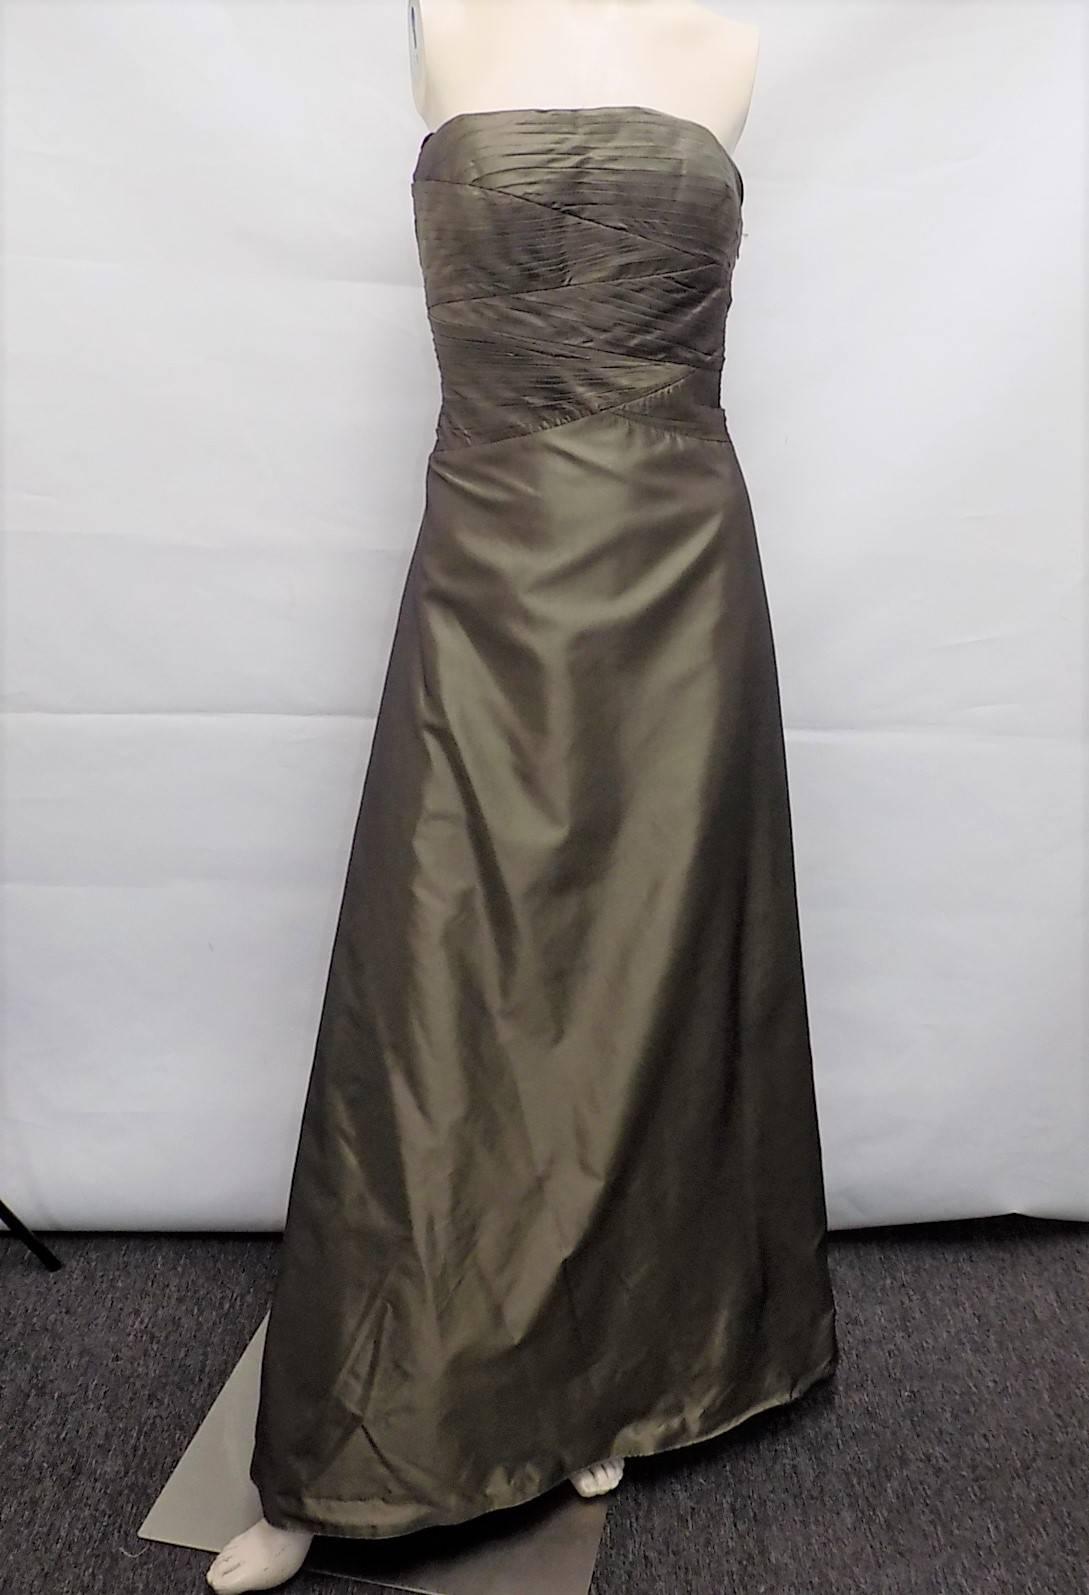 Gorgeous A line corset gown .Metallic silk taffeta. Pleated bodice  Bone reinforced . Underskirt sewn in for that full look. Jacket is all beaded silk organza with closure at the collar. Mint condition. States size 10. 
Gown bust  38" waist